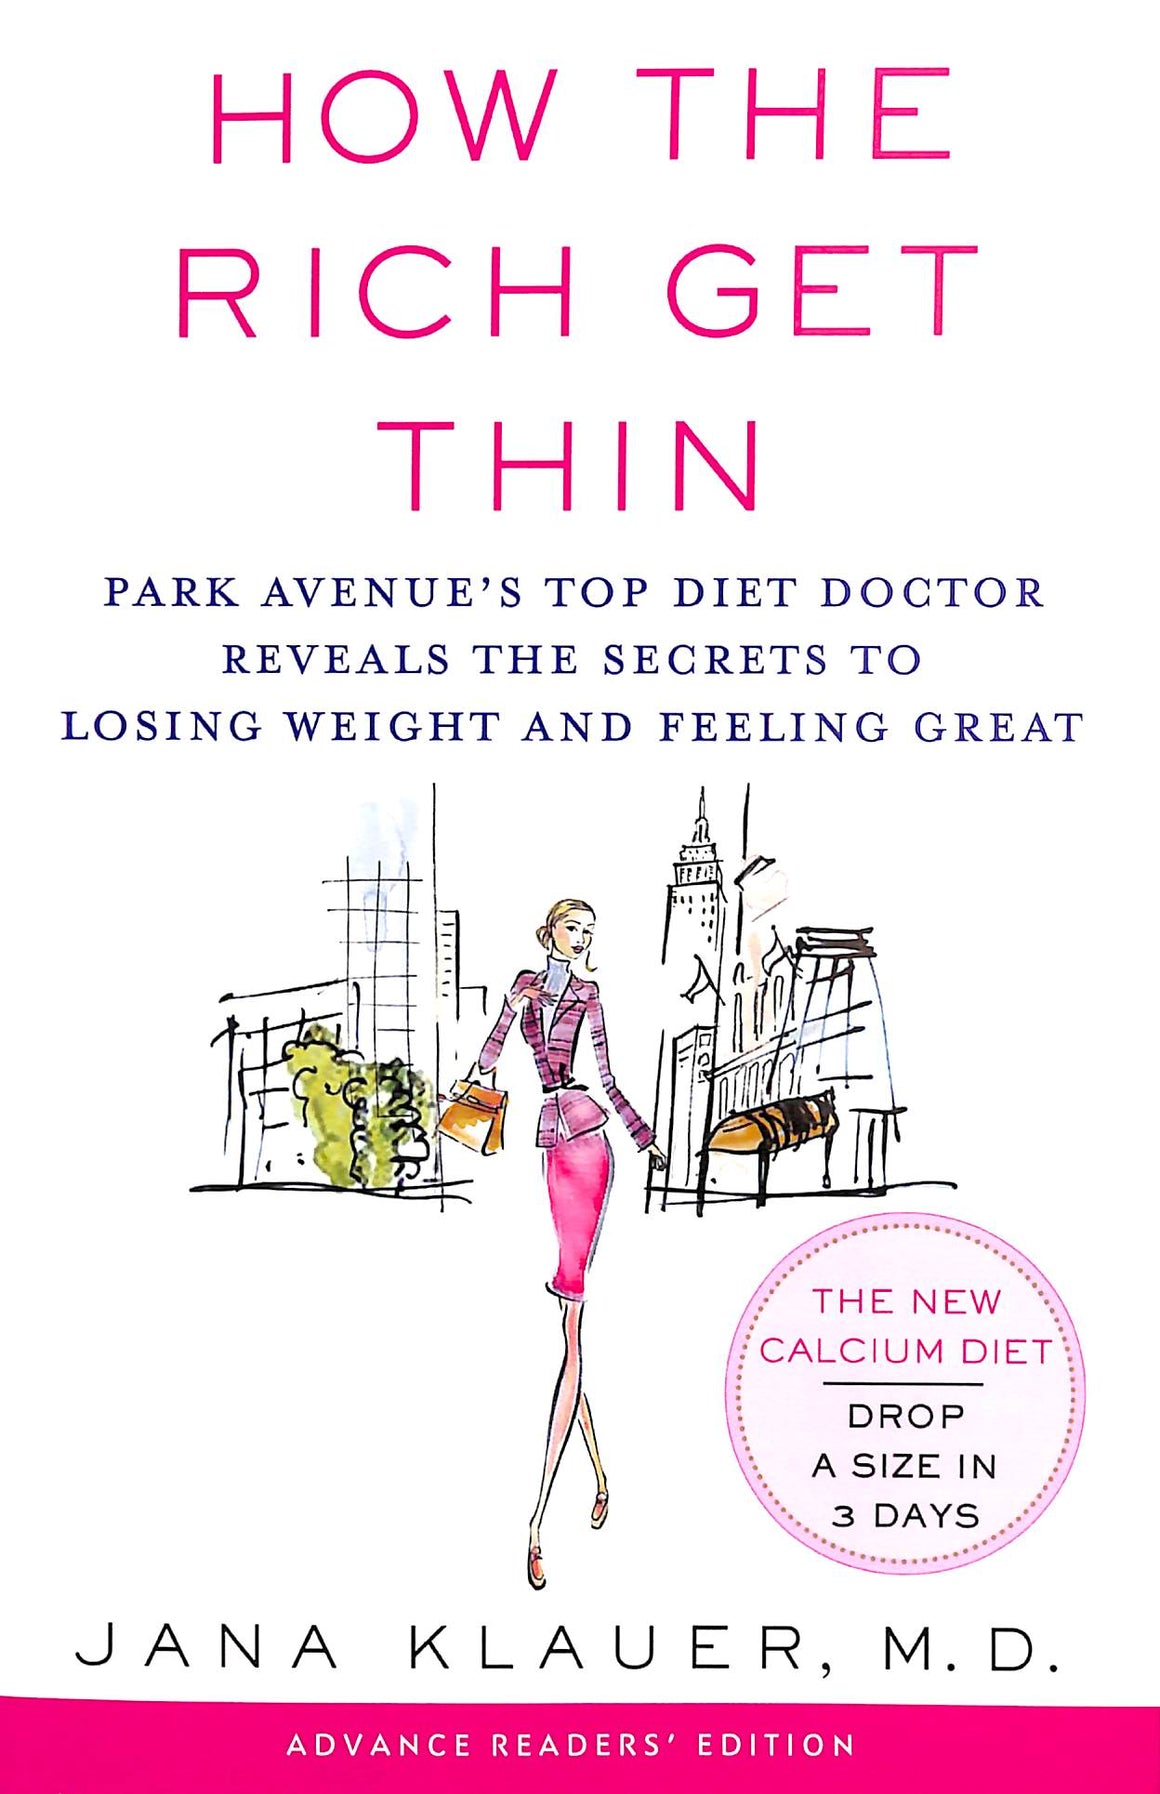 "How The Rich Get Thin: Park Avenue's Top Diet Doctor Reveals The Secrets To Losing Weight And Feeling Great" 2006 KLAUER, Jana, M.D.